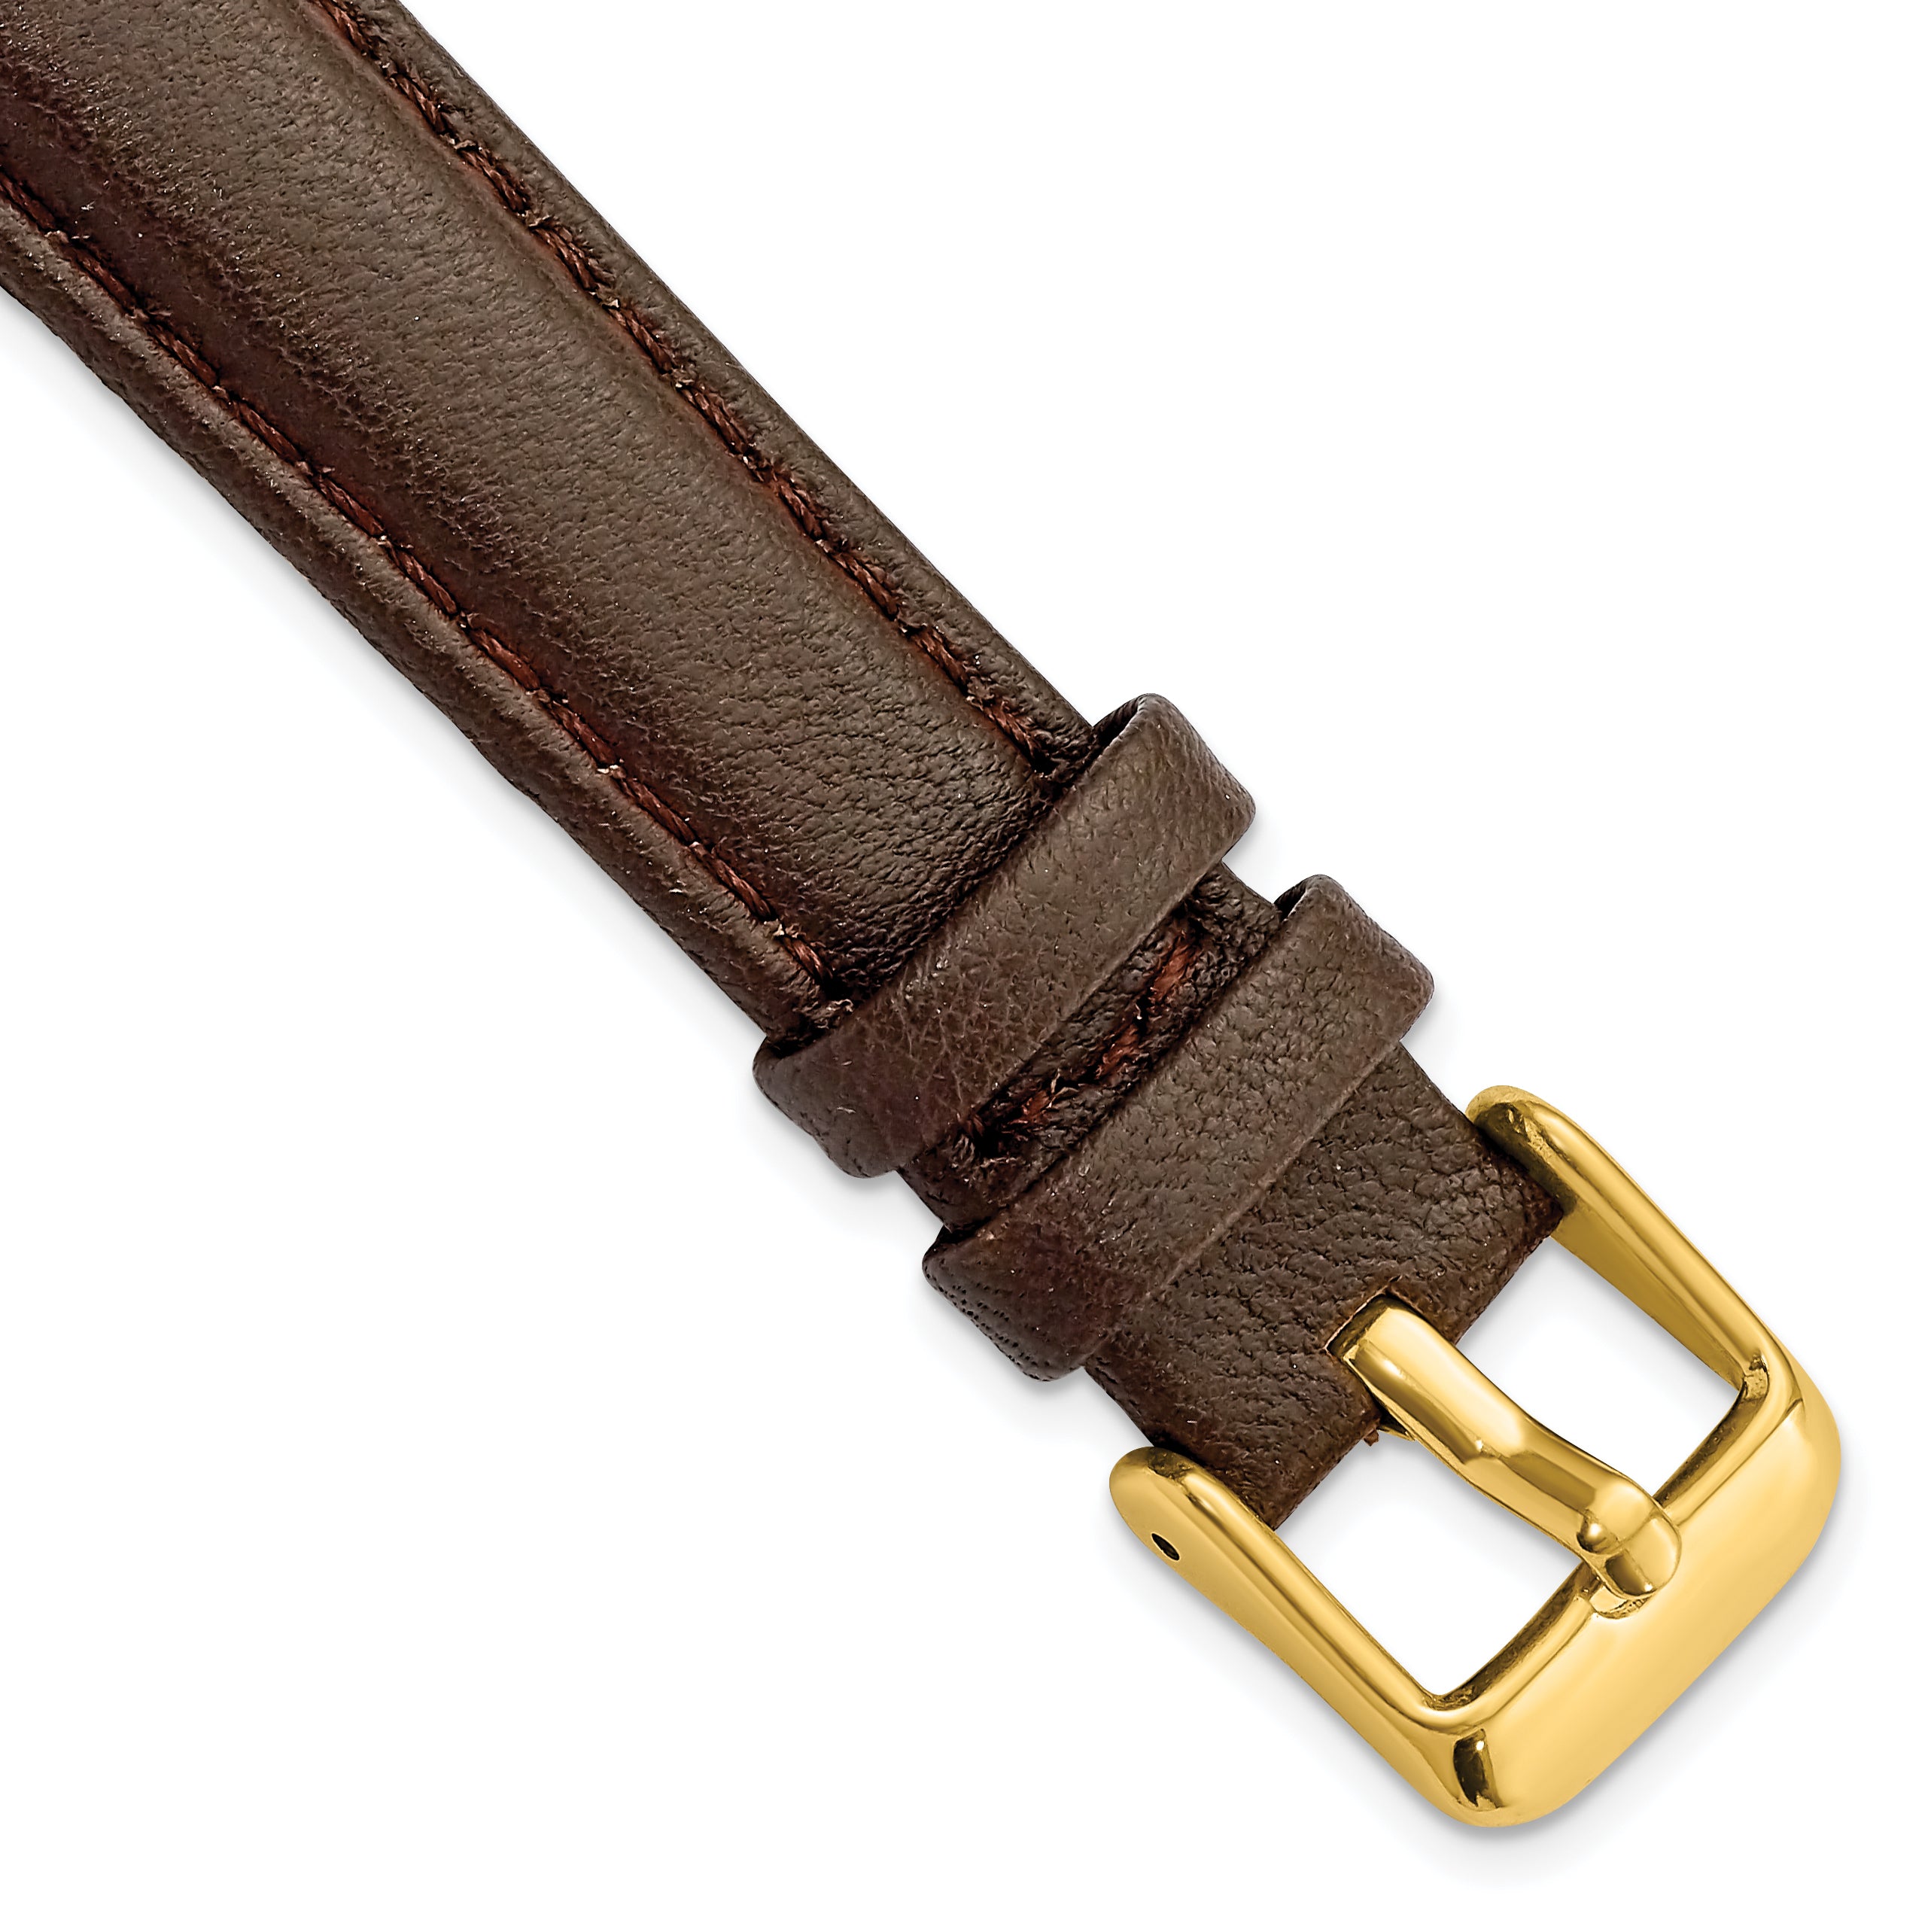 DeBeer 16mm Dark Brown Glove Leather with Gold-tone Panerai Style Buckle 7.75 inch Watch Band